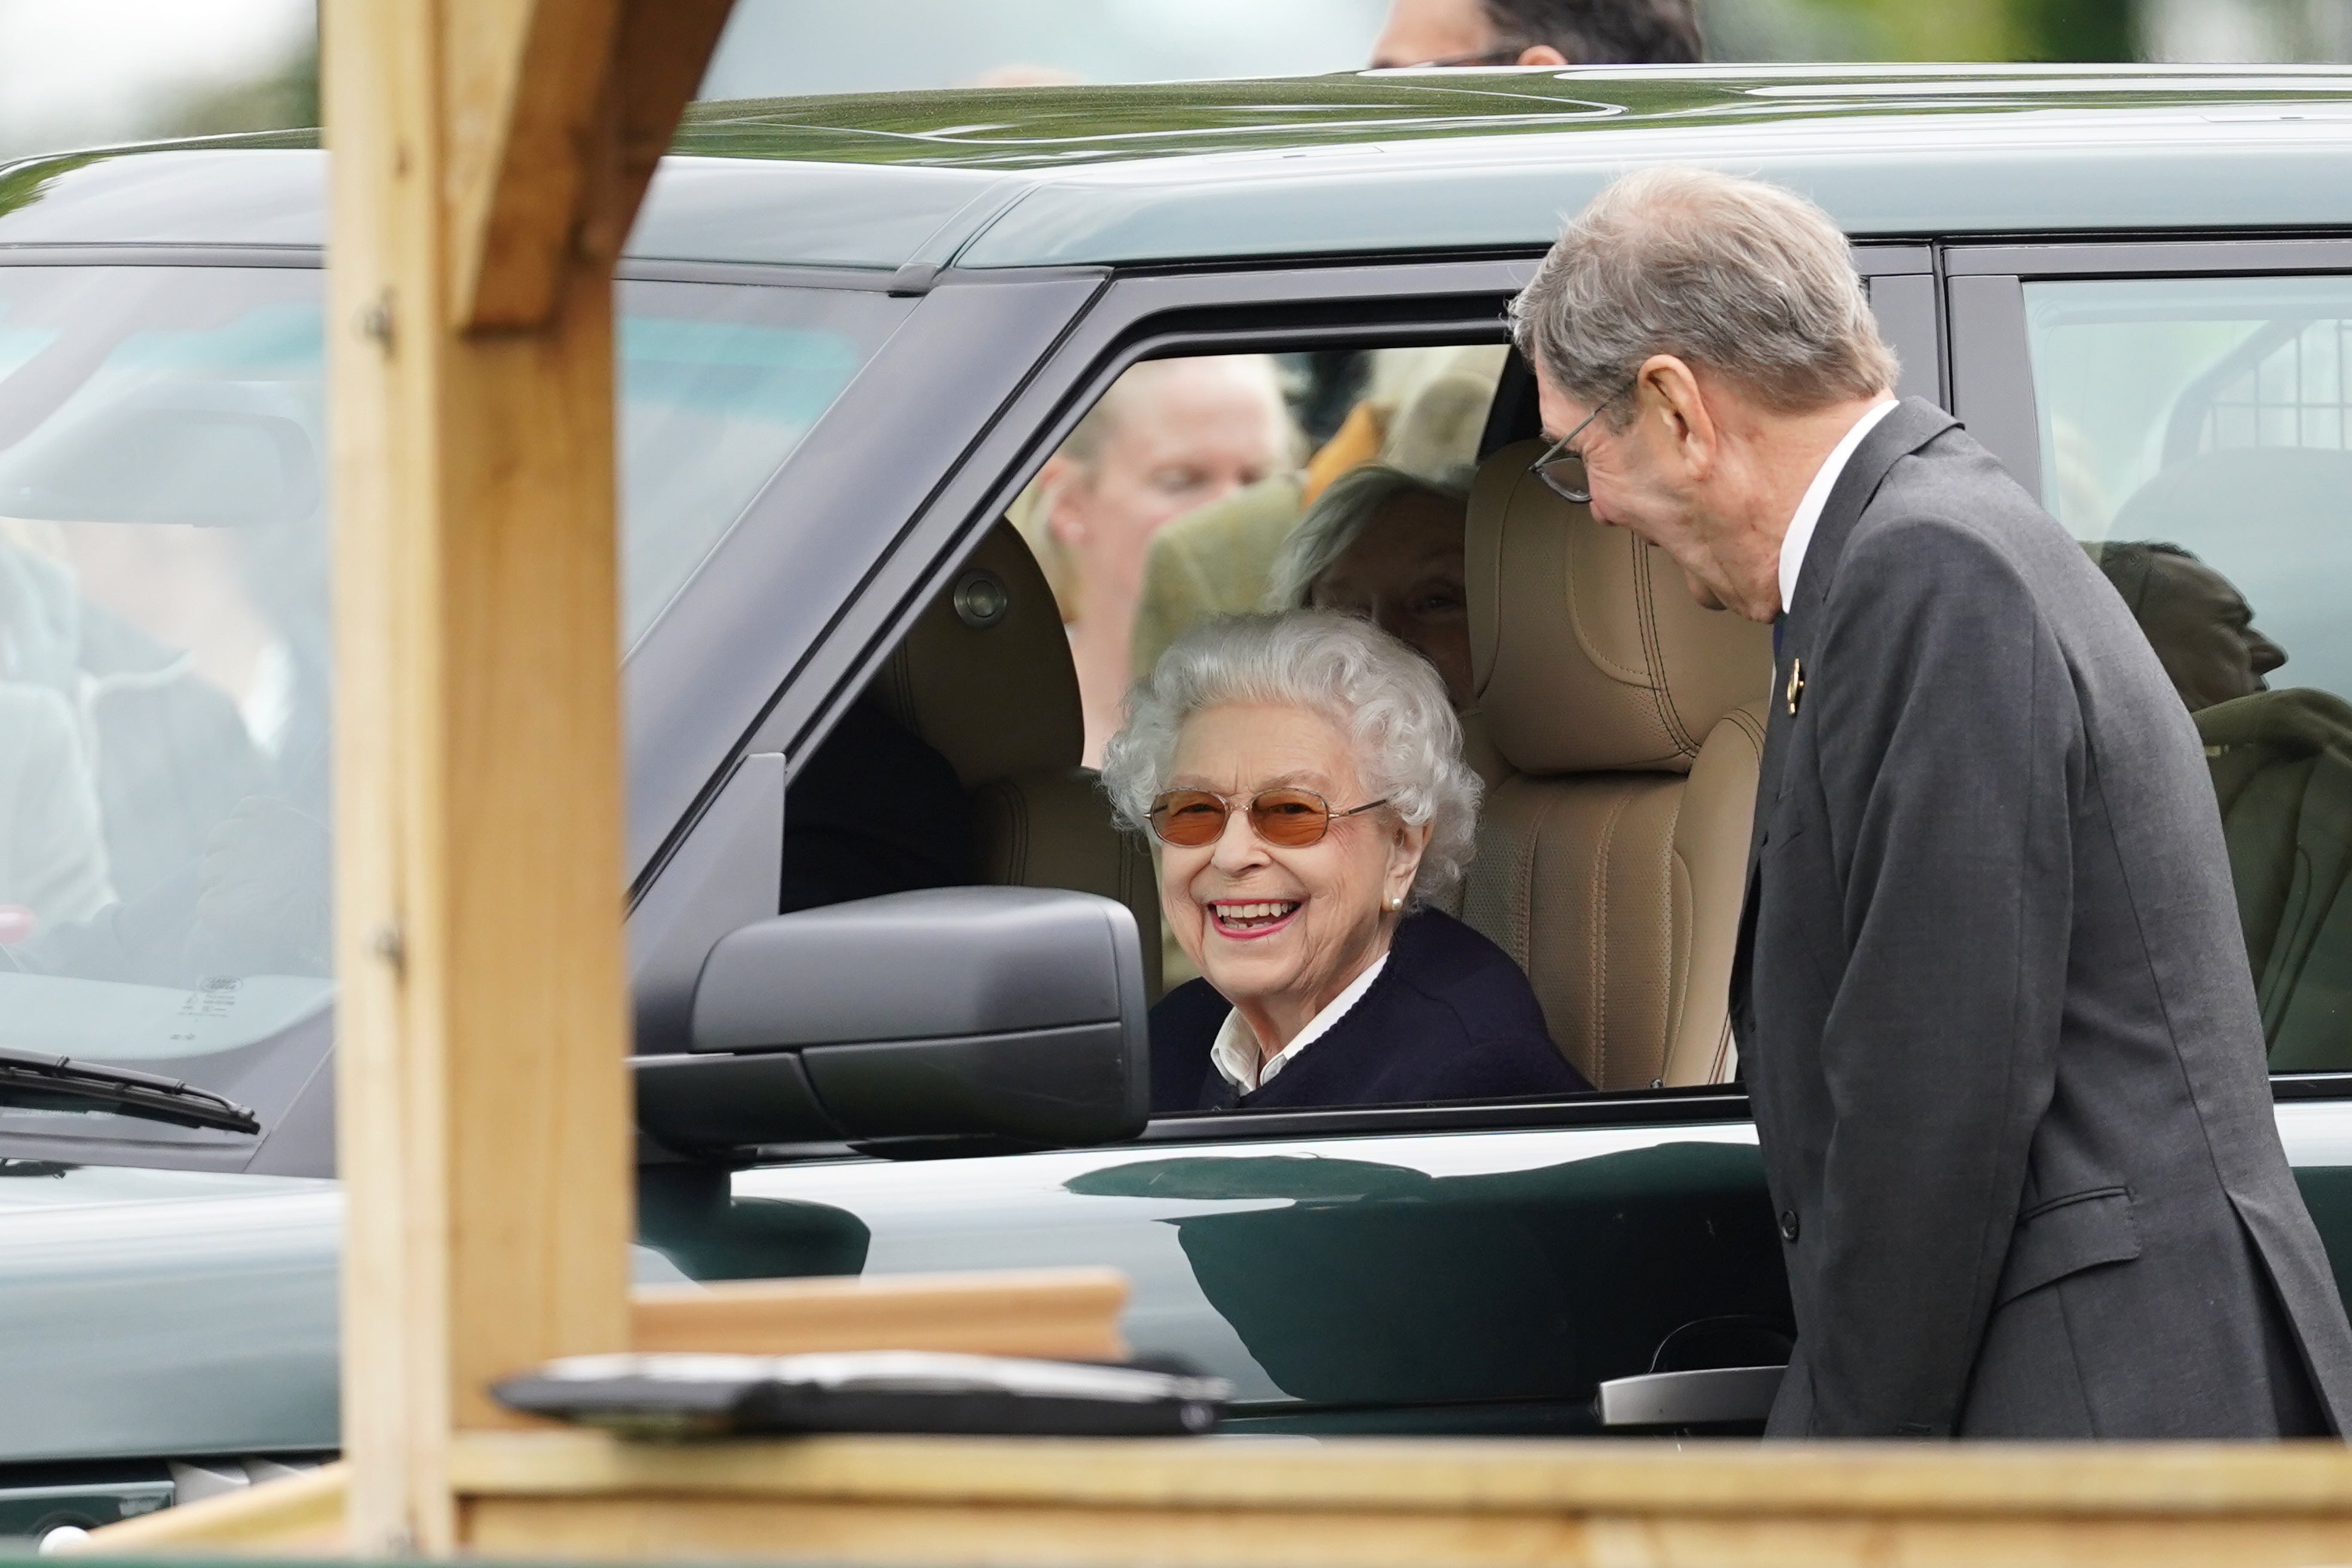 The Queen at the Royal Windsor Horse Show (Steve Parsons/PA)